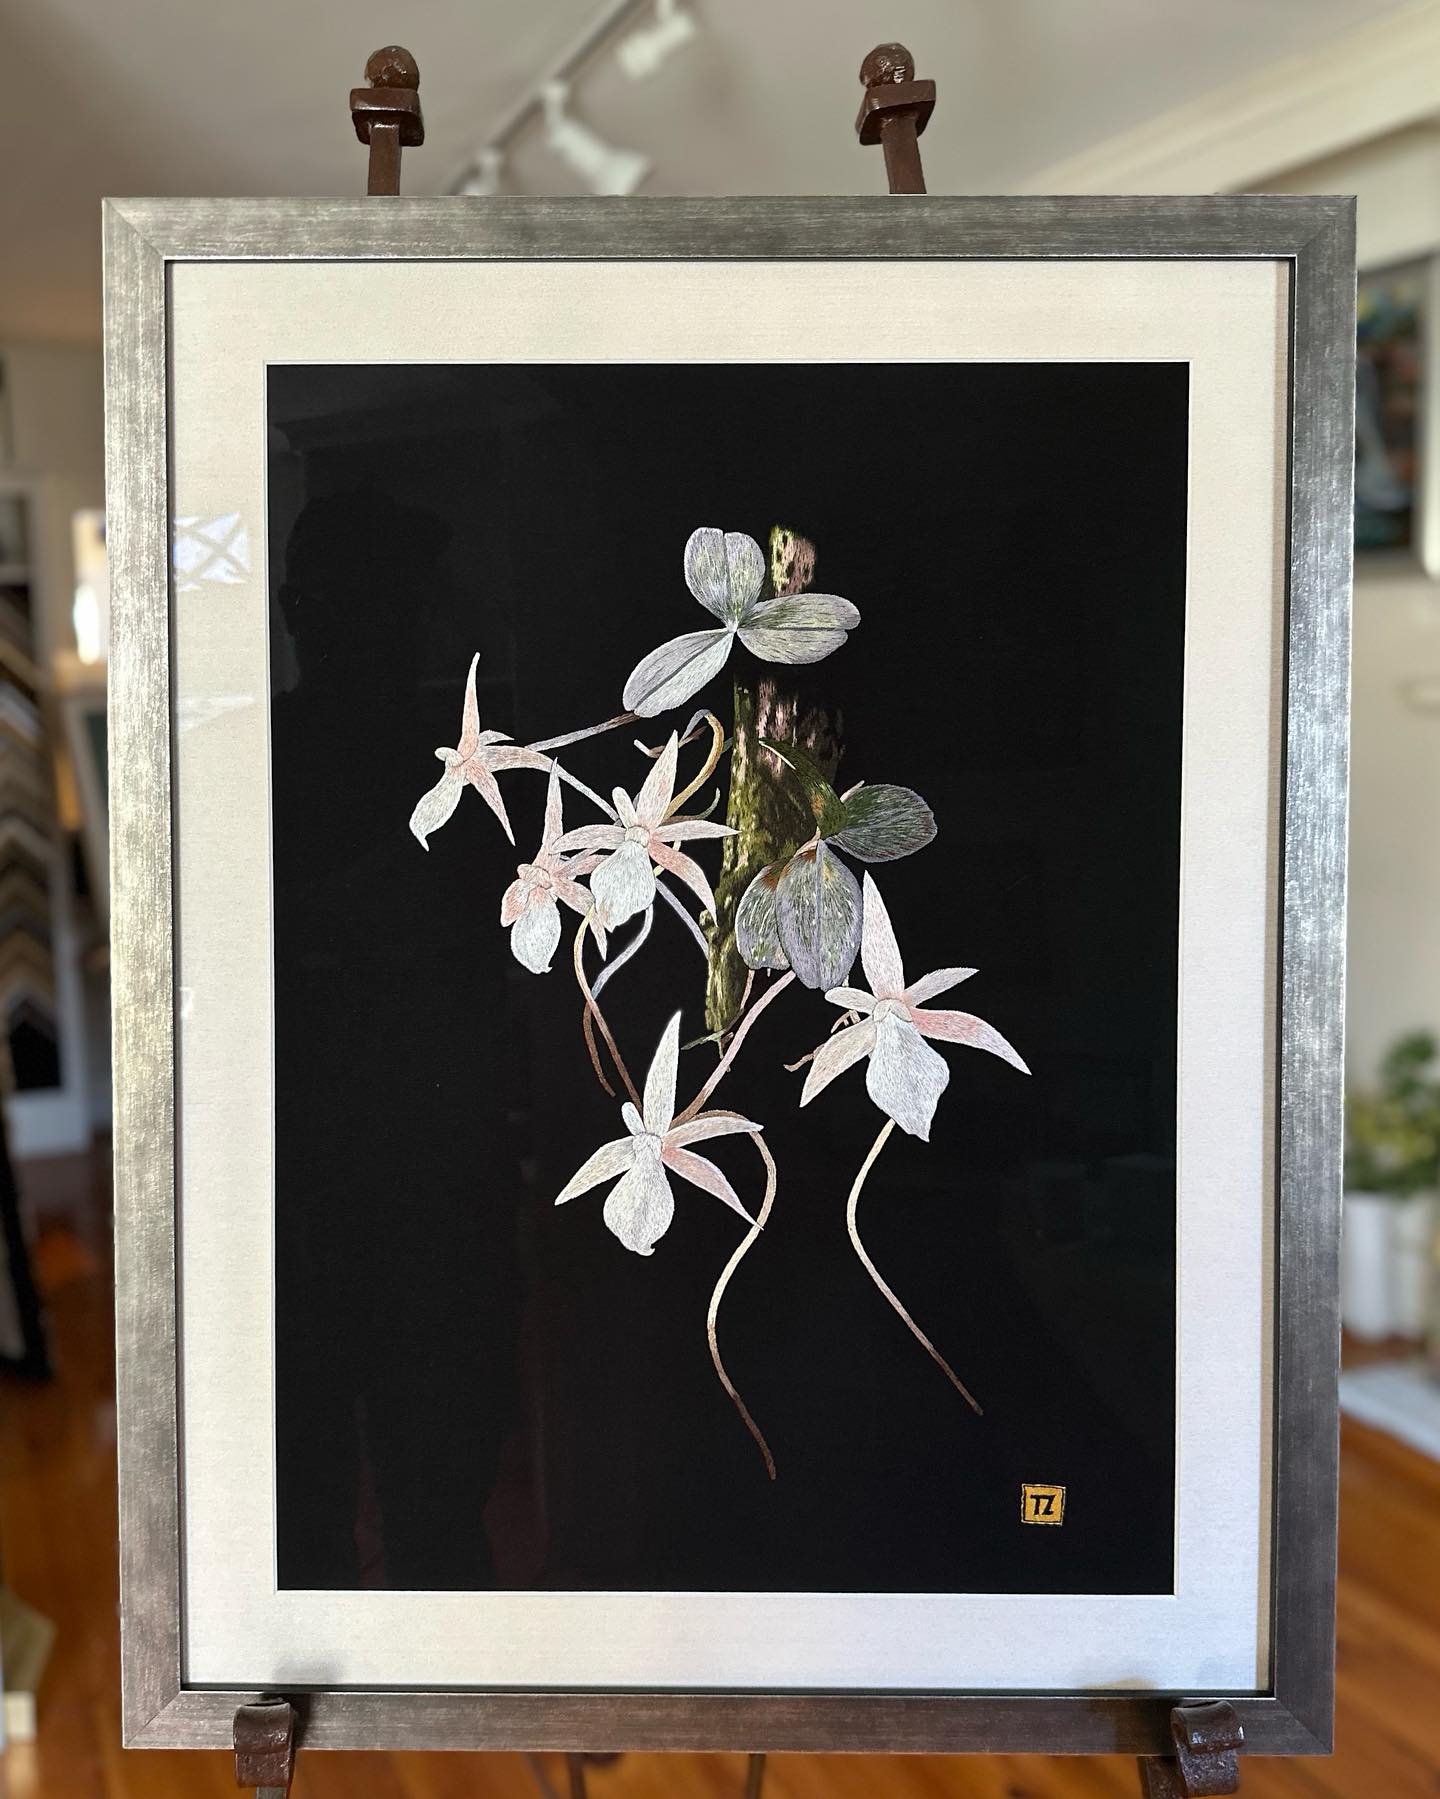 Embroidery on silk.  A modern profile with a vintage finish is the perfect compliment to this beautiful hand made creation. 

#embroideryart #textileart #customframing #fotiouframes #museumglass #bedfordvillagebuzz #bedfordny #northernwestchester